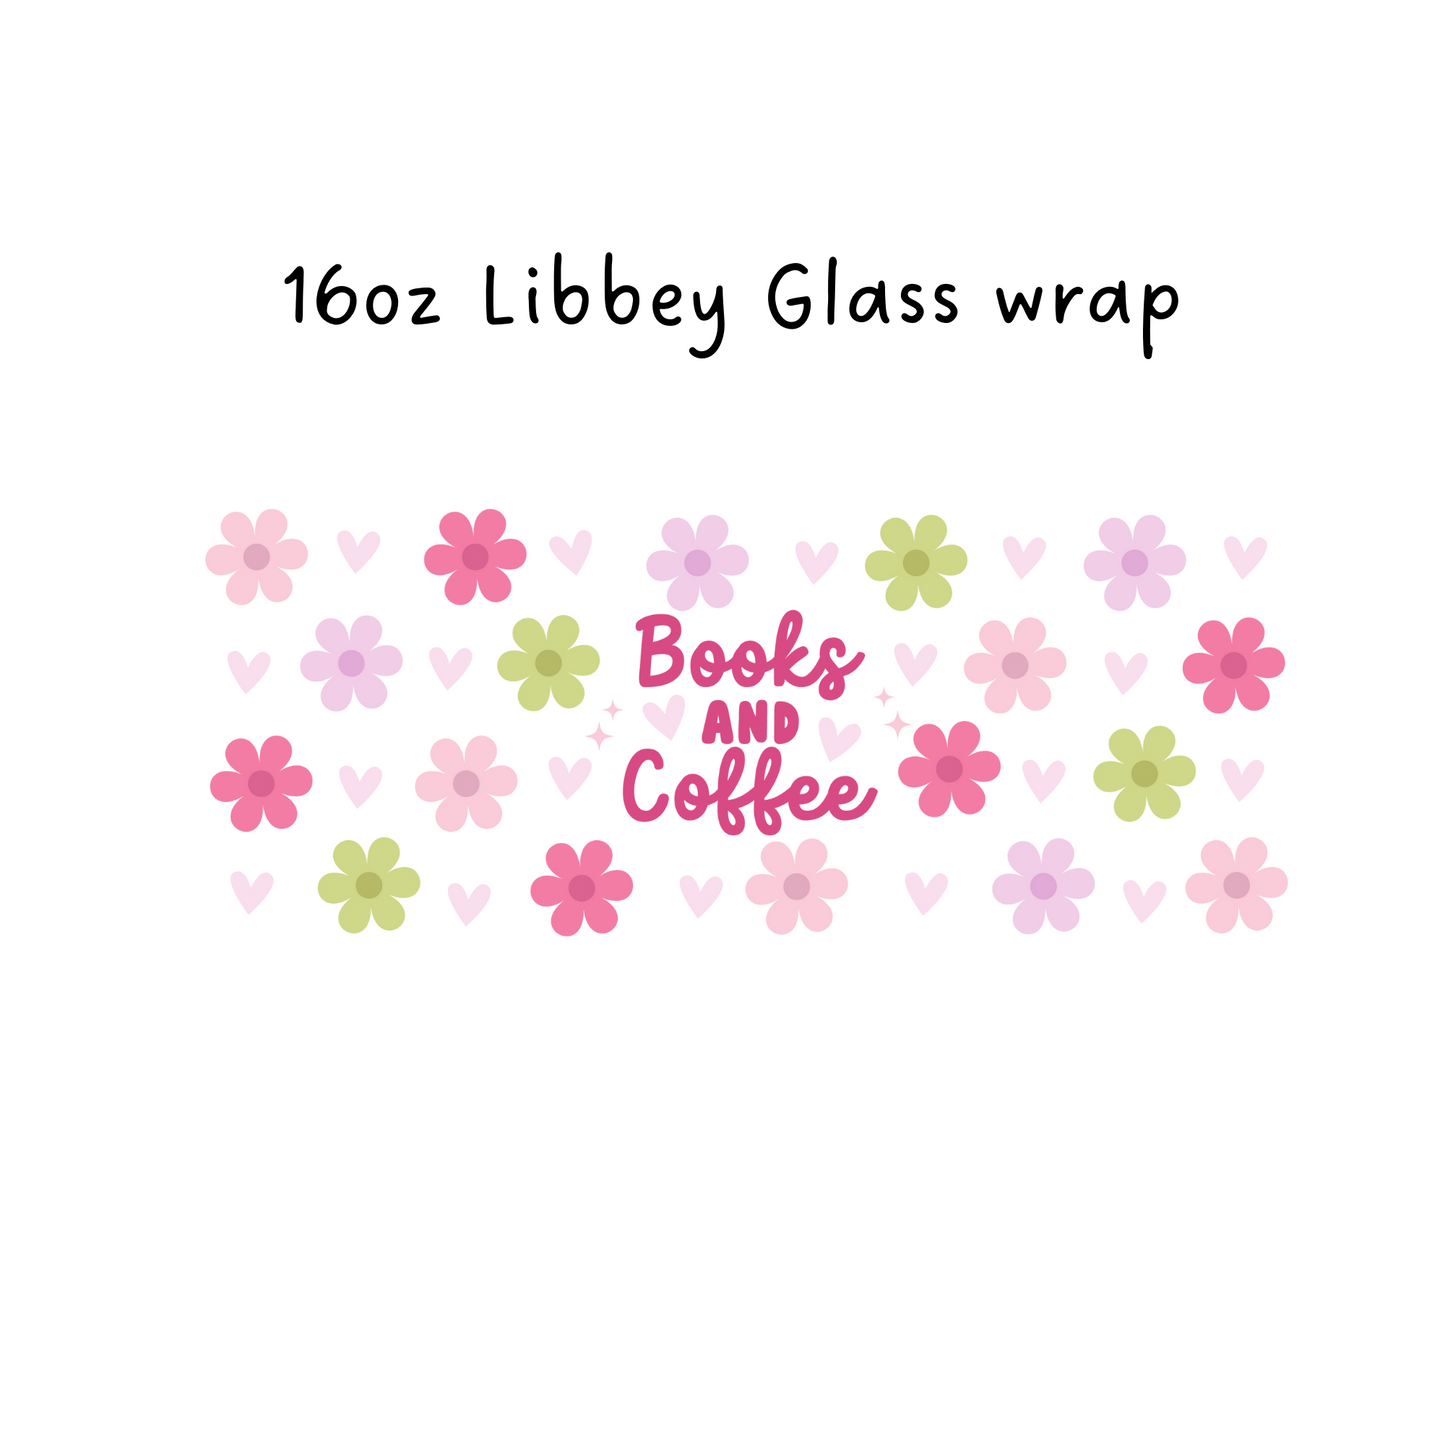 Books and Coffee 16 Oz Libbey Beer Glass Wrap